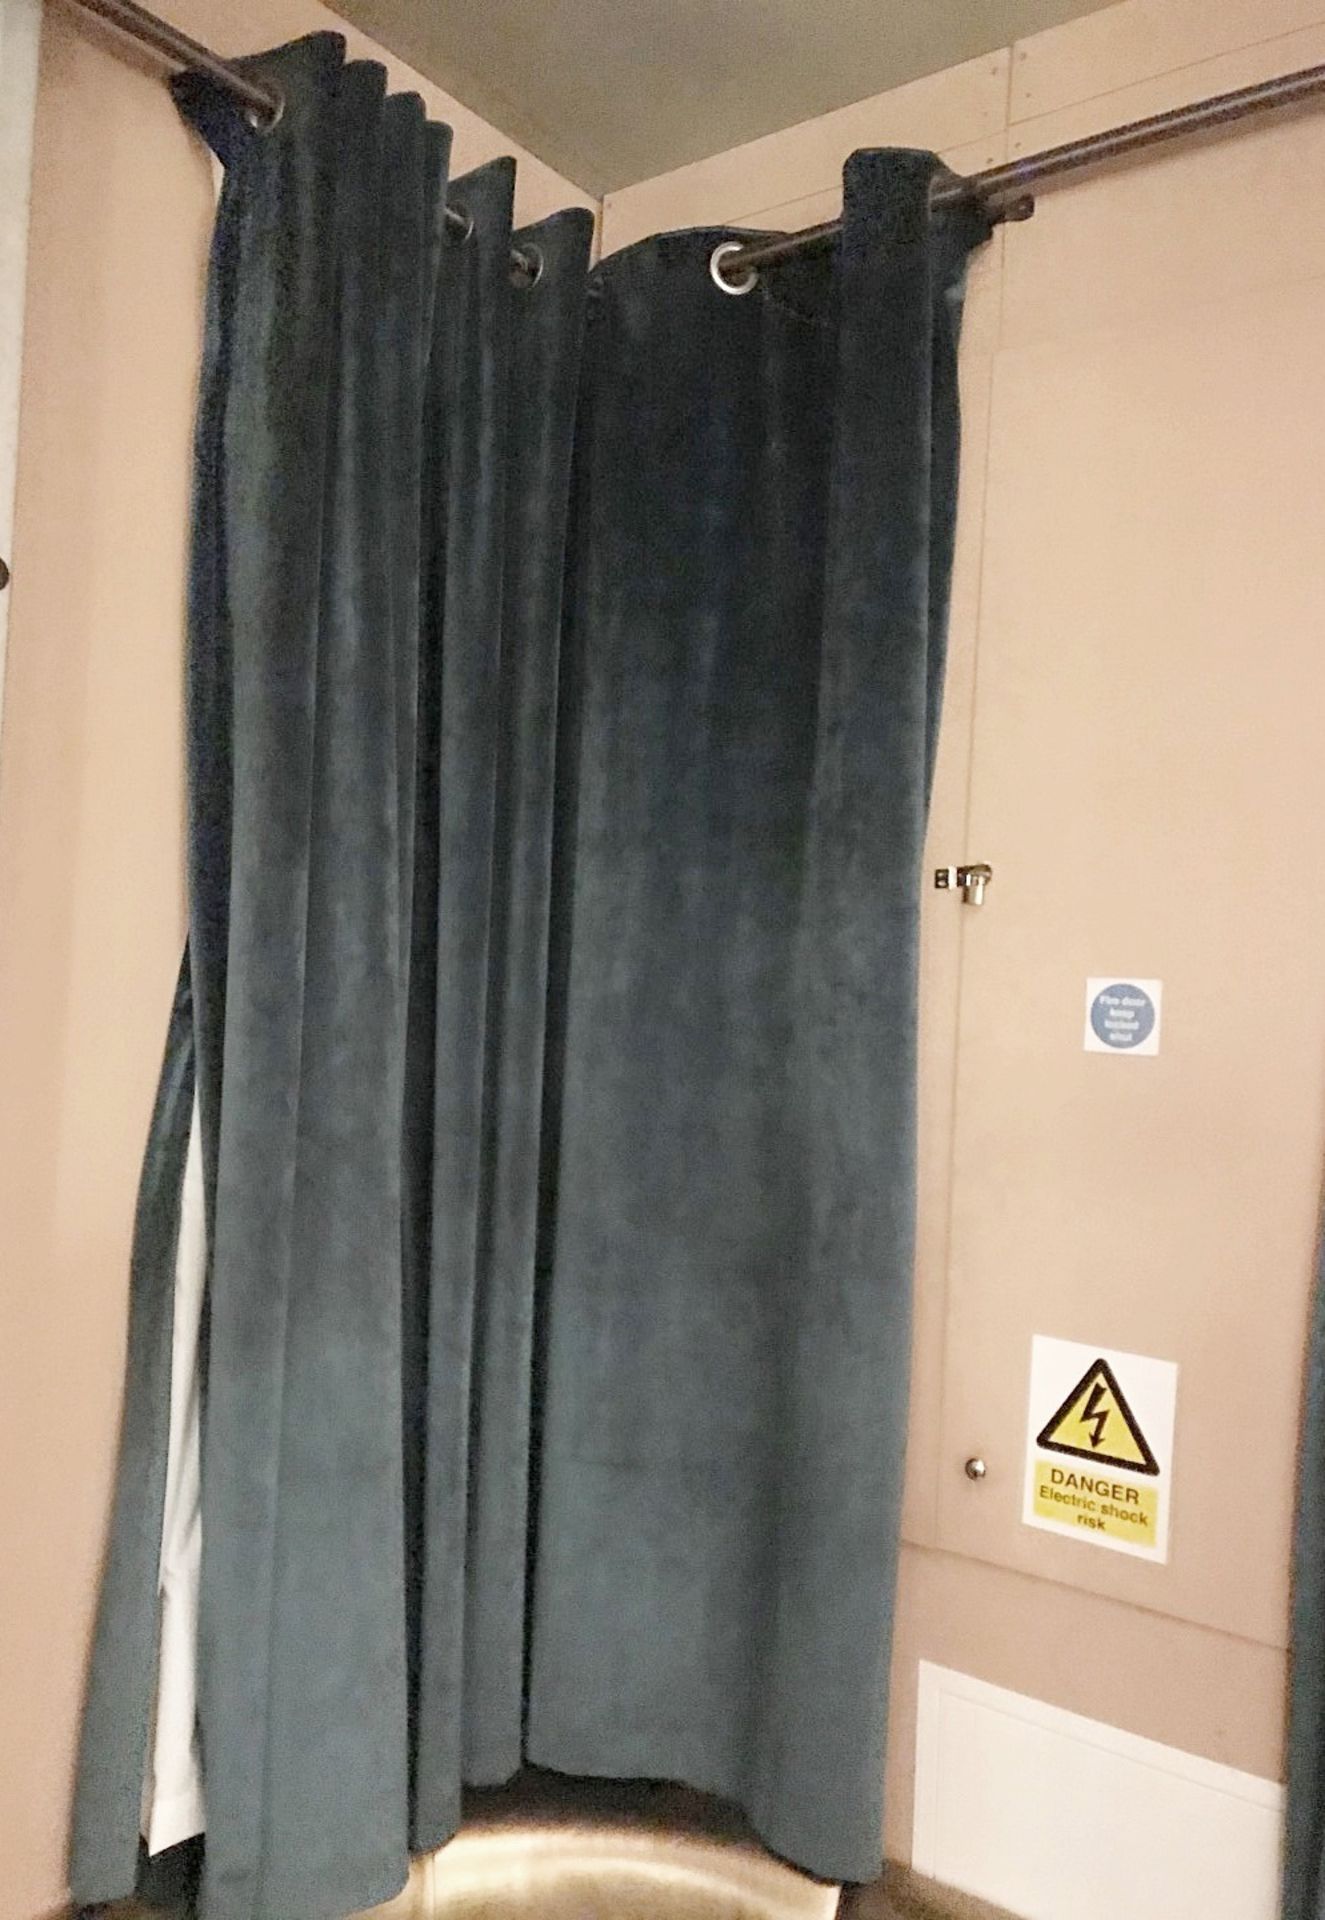 1 x Corner Curtain Rail and Curtains - CL554 - Ref IM - Location: London E1 This item is located